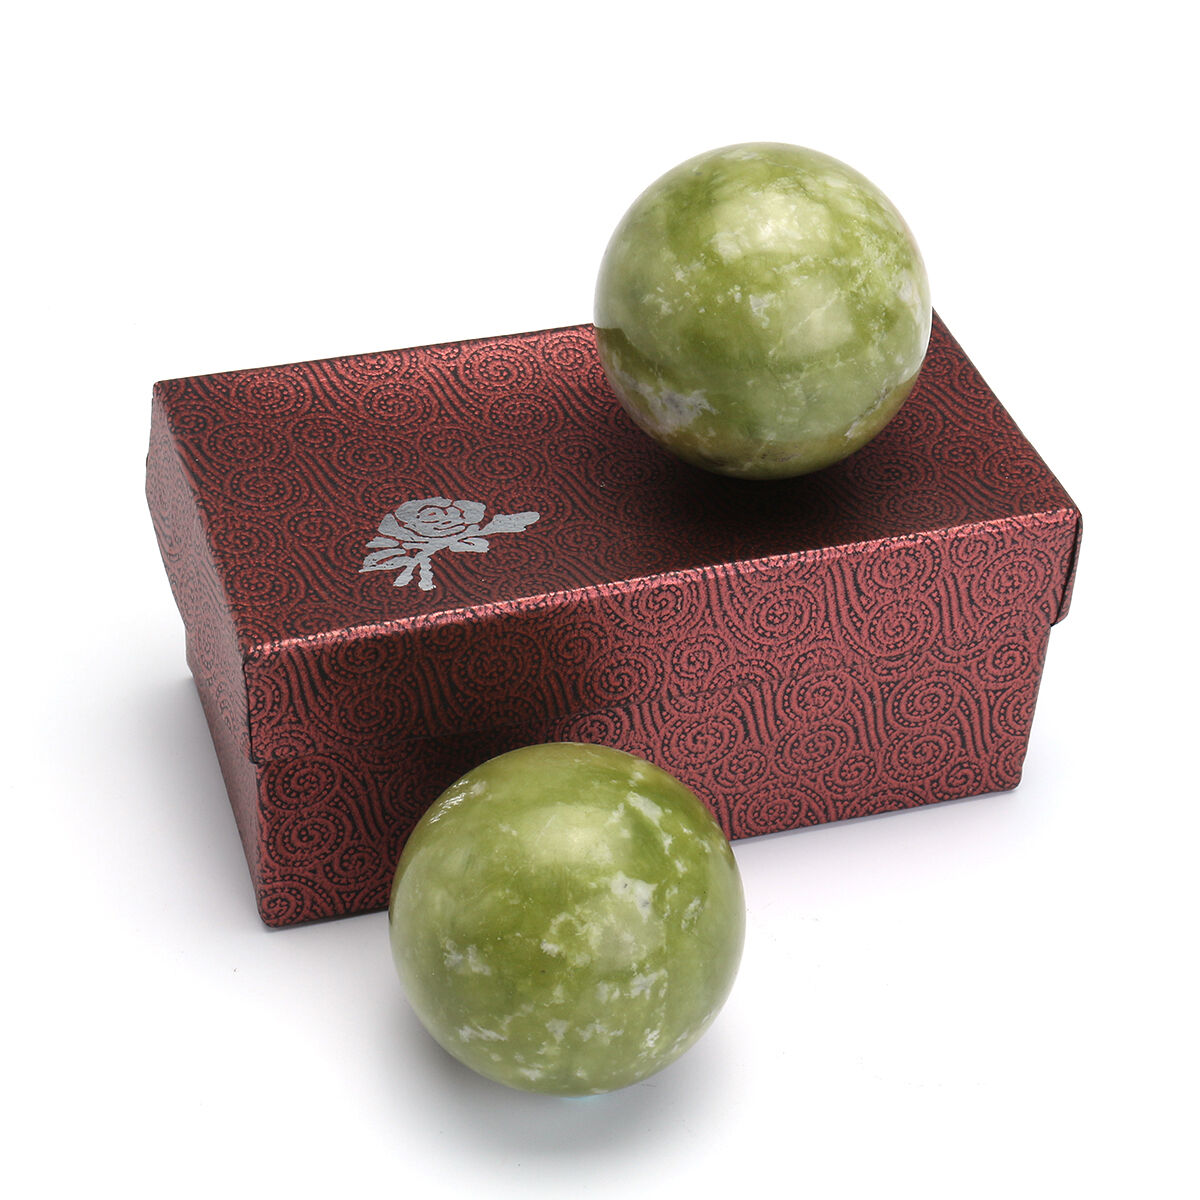 

Chinese Health Exercise Stress Jade Stone BAODING Balls Relaxation Therapy 48mm